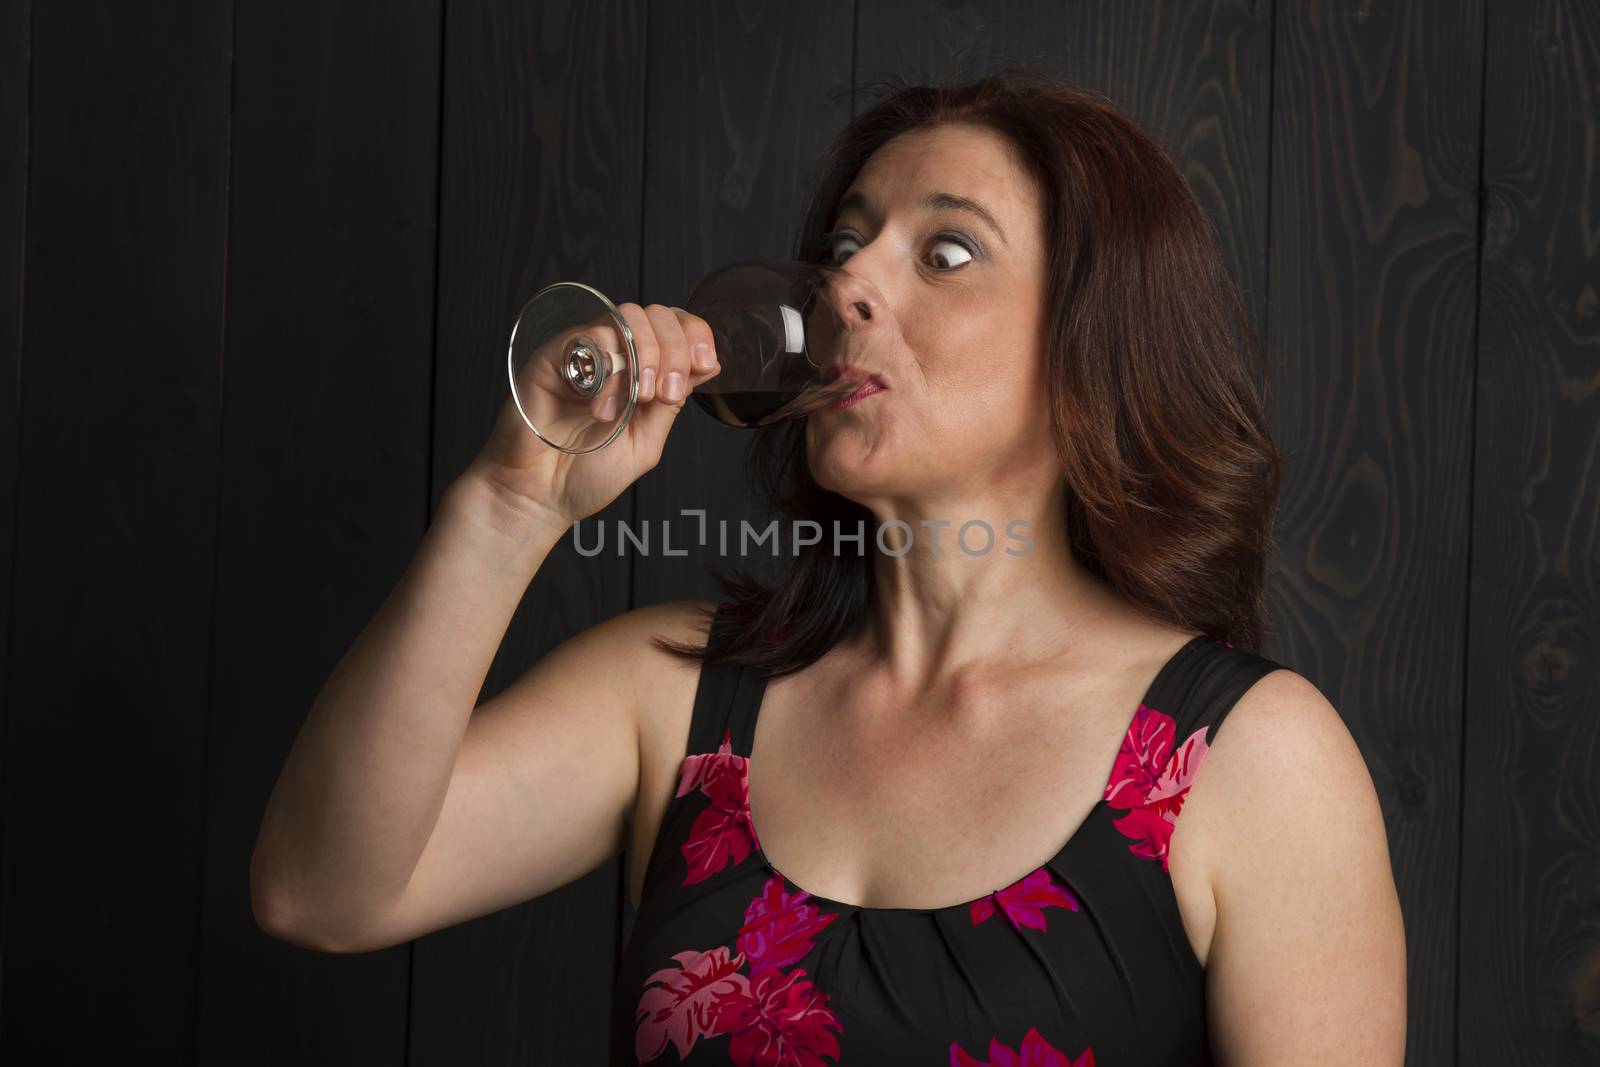 woman in her forties taking a big gulp out of a wine glass